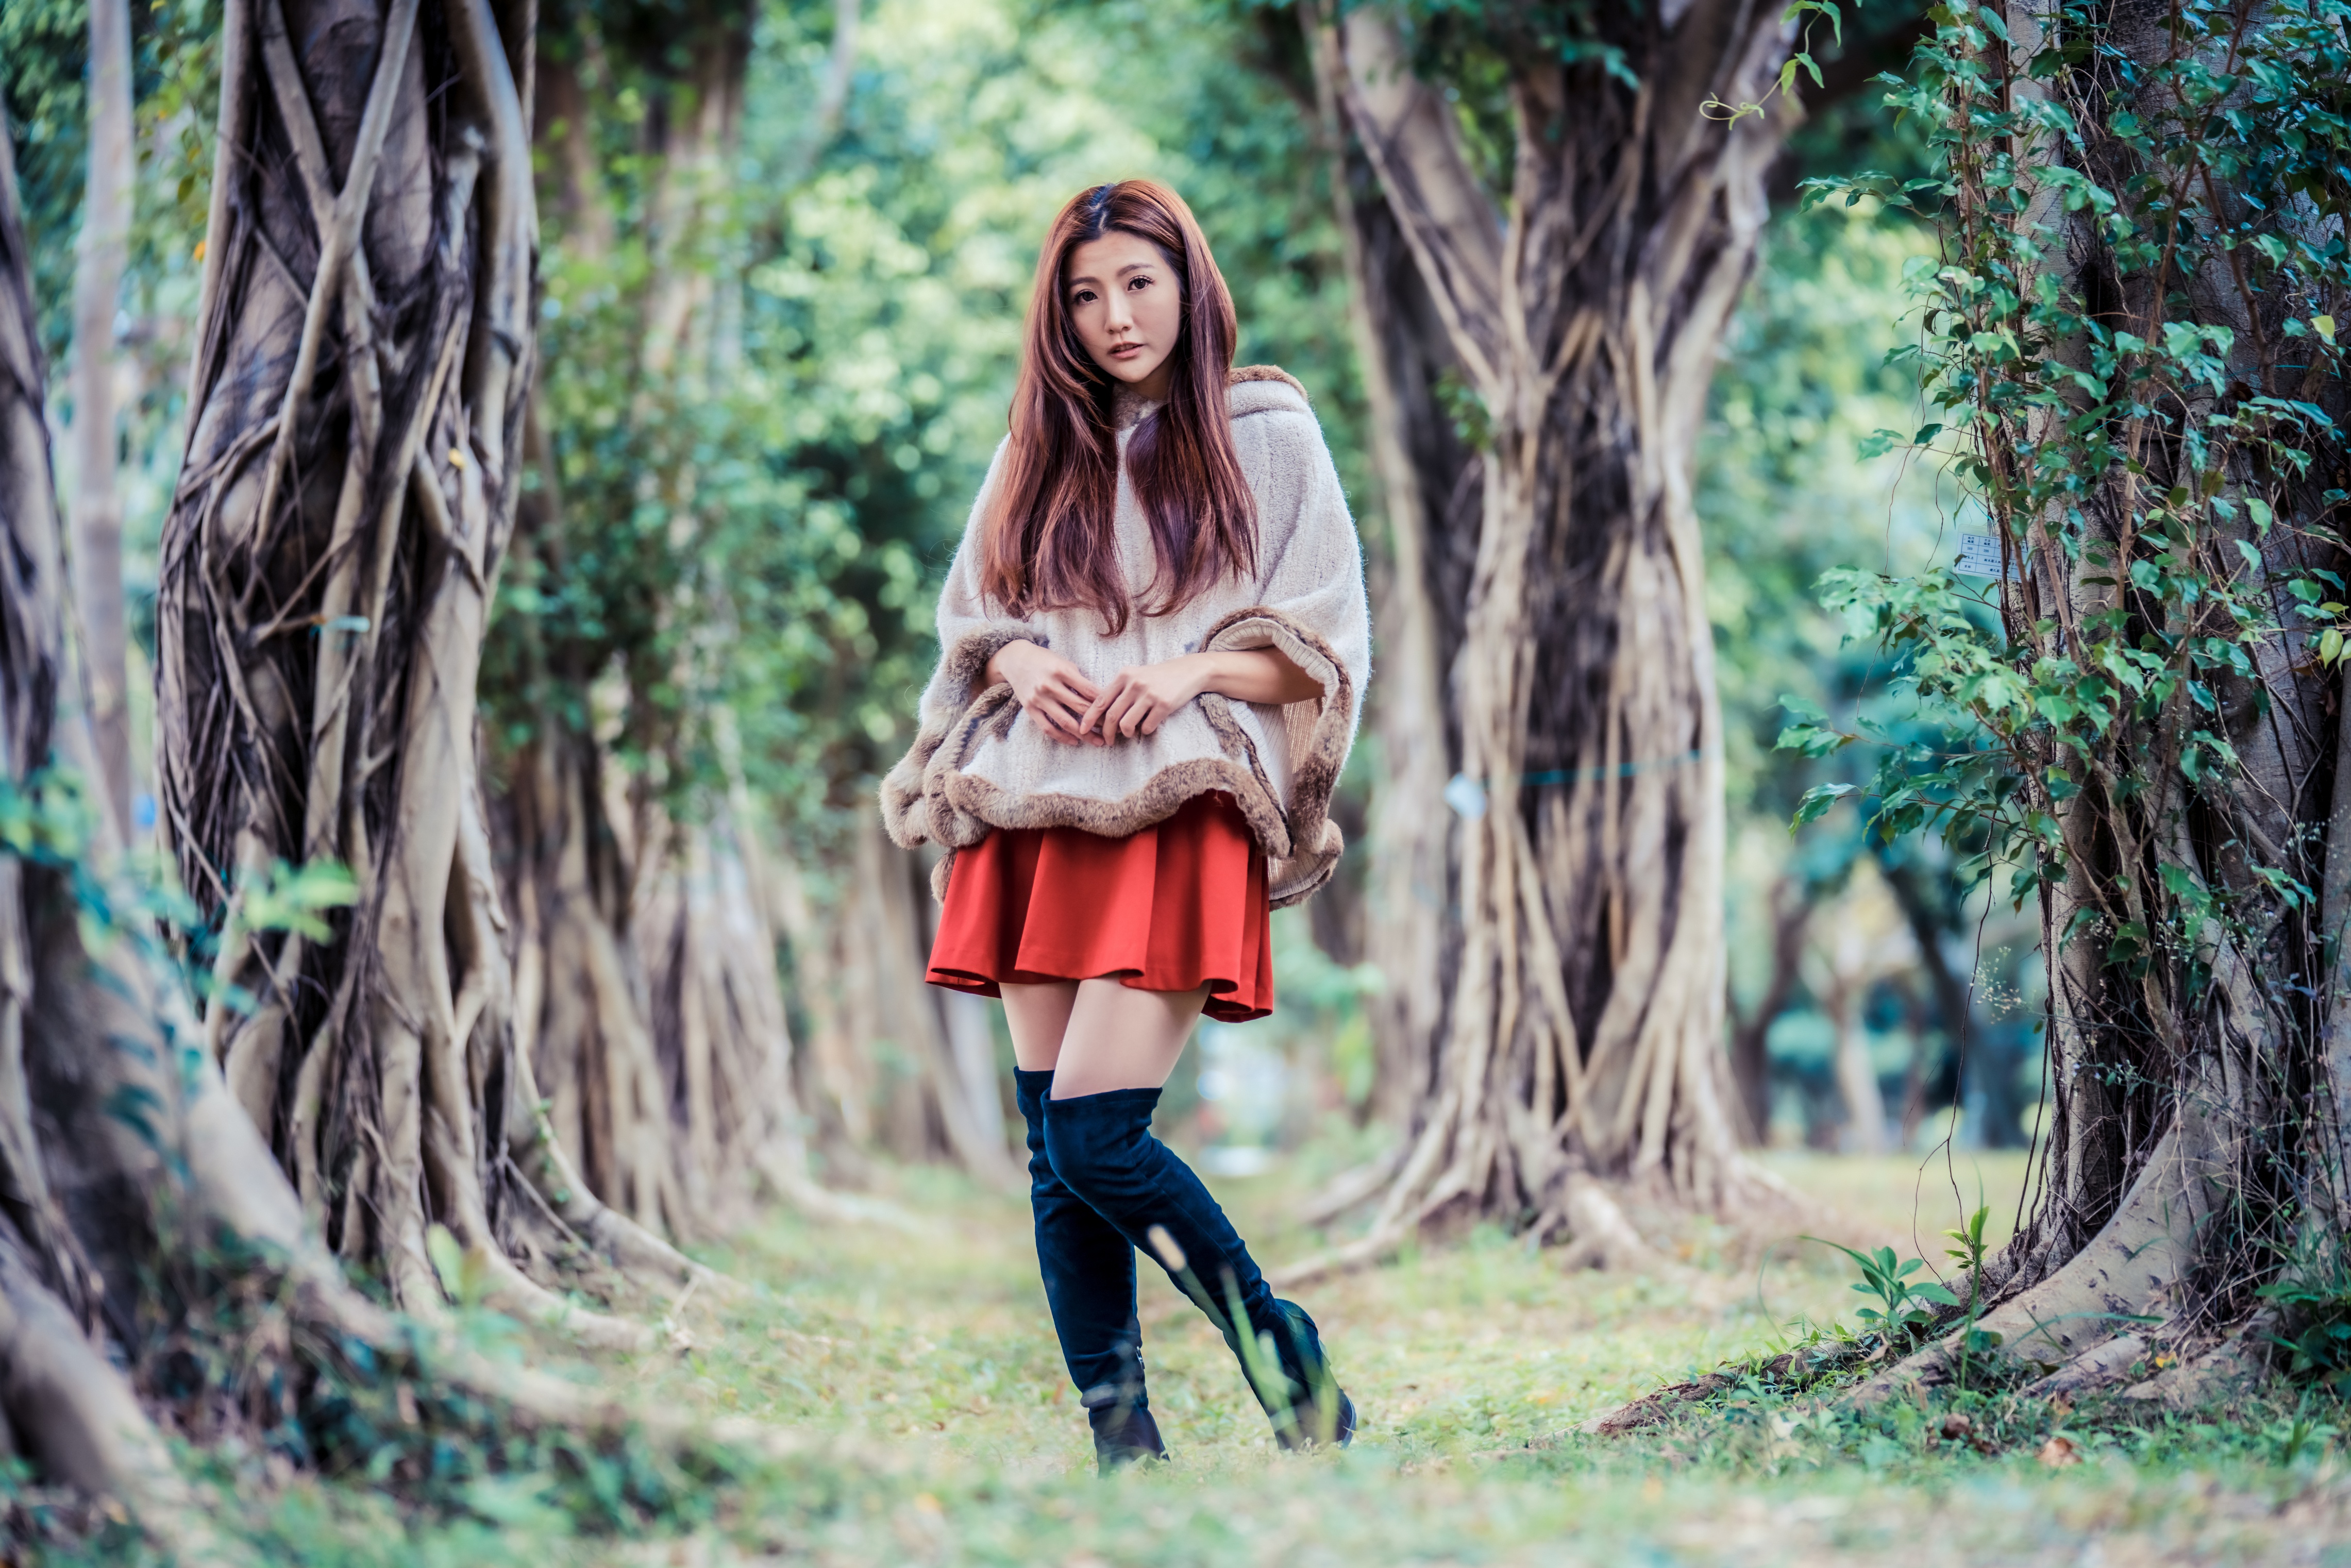 People 4562x3043 Asian women model long hair brunette trees grass knee-high boots fur coats red skirt looking at viewer outdoors women outdoors depth of field standing frills leaves ground